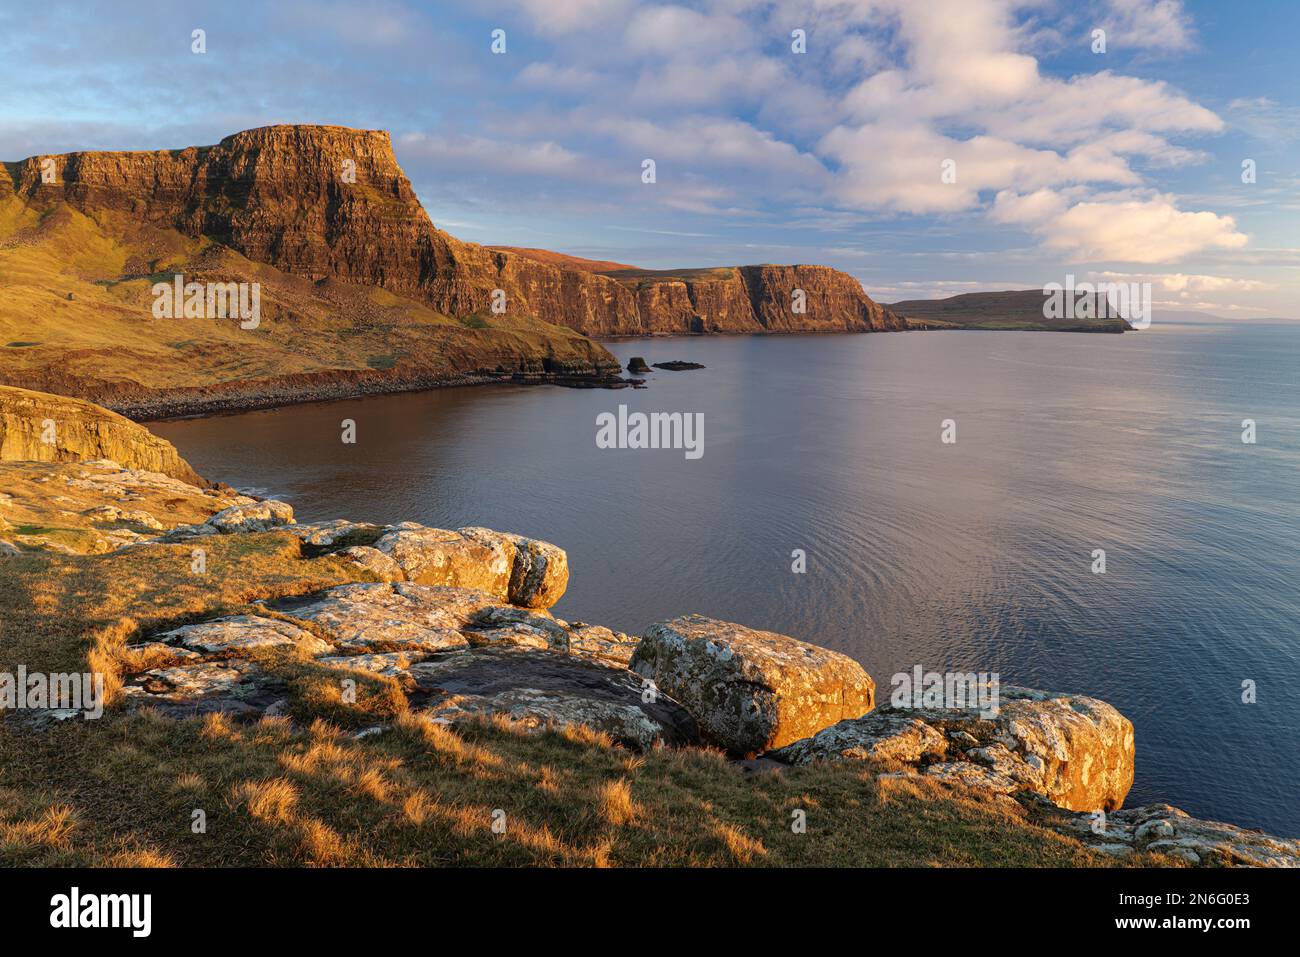 Moonen Bay, Waterstein Head and the Sea of the Hebrides lit by winter evening light, Isle of Skye, Scotland Stock Photo